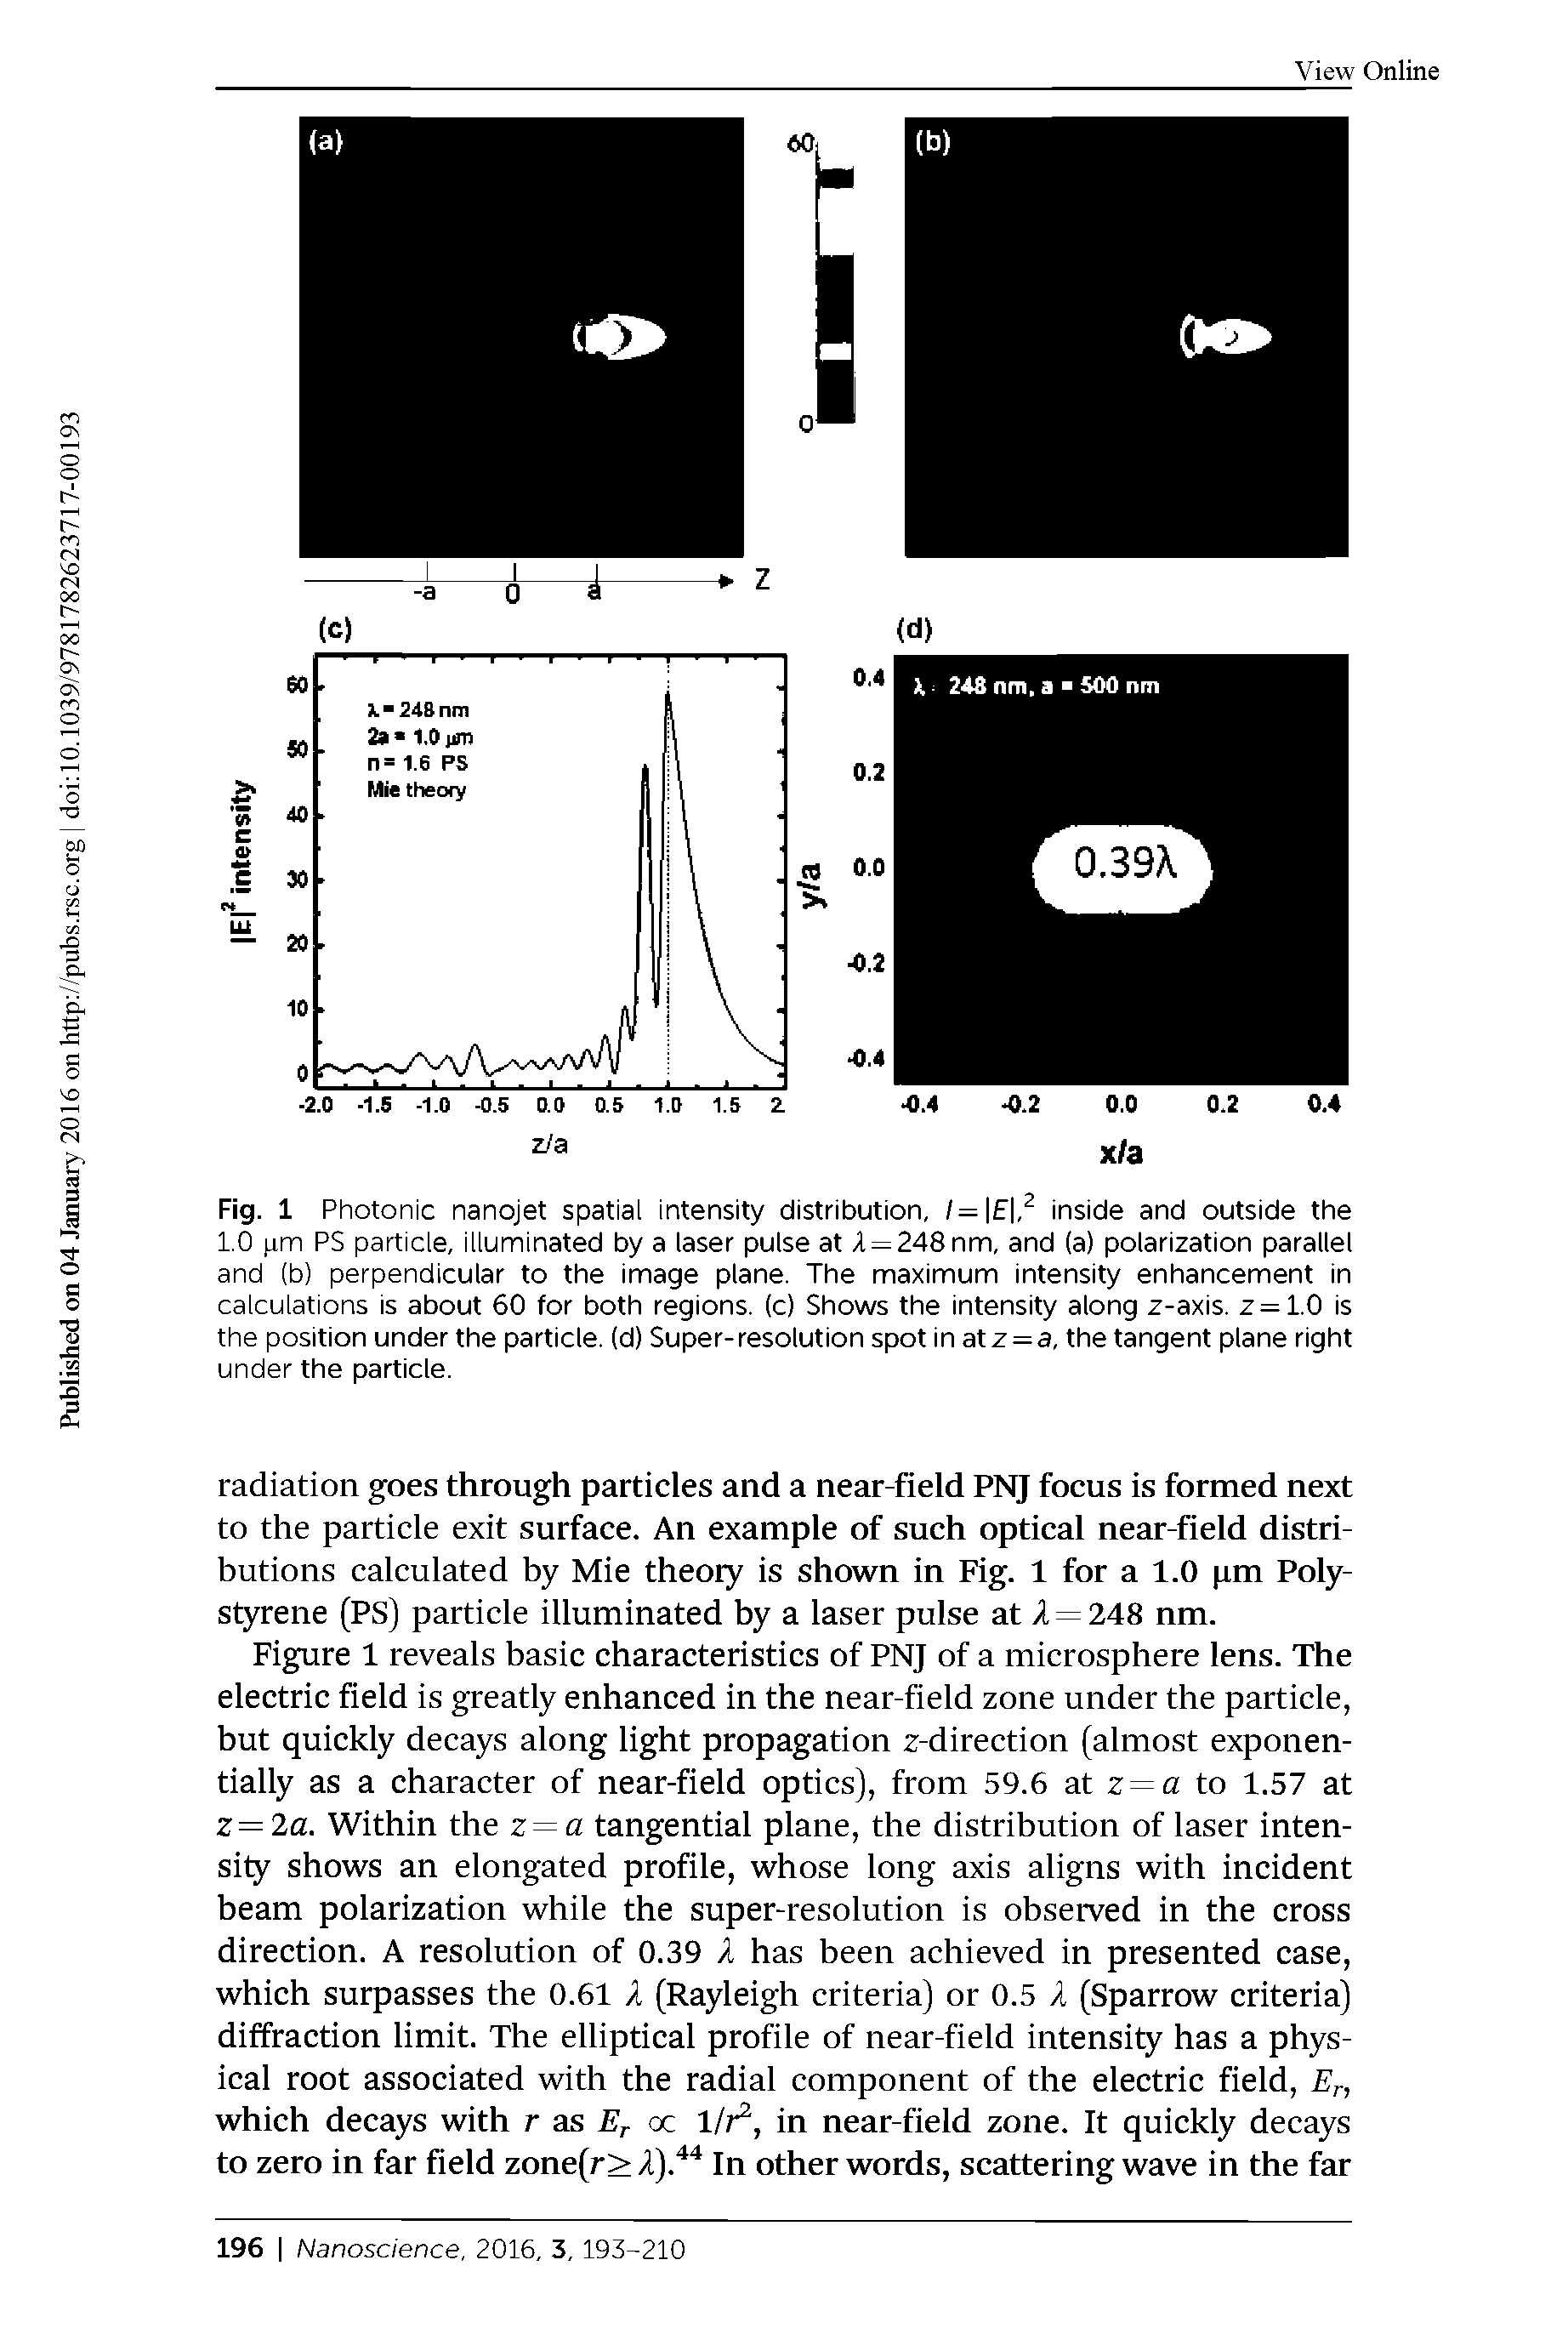 Fig. 1 Photonic nanojet spatial intensity distribution, /= , inside and outside the 1.0 pm PS particle, illuminated by a laser pulse at A = 248nm, and (a) polarization parallel and (b) perpendicular to the image plane. The maximum intensity enhancement in calculations is about 60 for both regions, (c) Shows the intensity along z-axis. z = 1.0 is the position under the particle, (d) Super-resolution spot in atz=a, the tangent plane right under the particle.